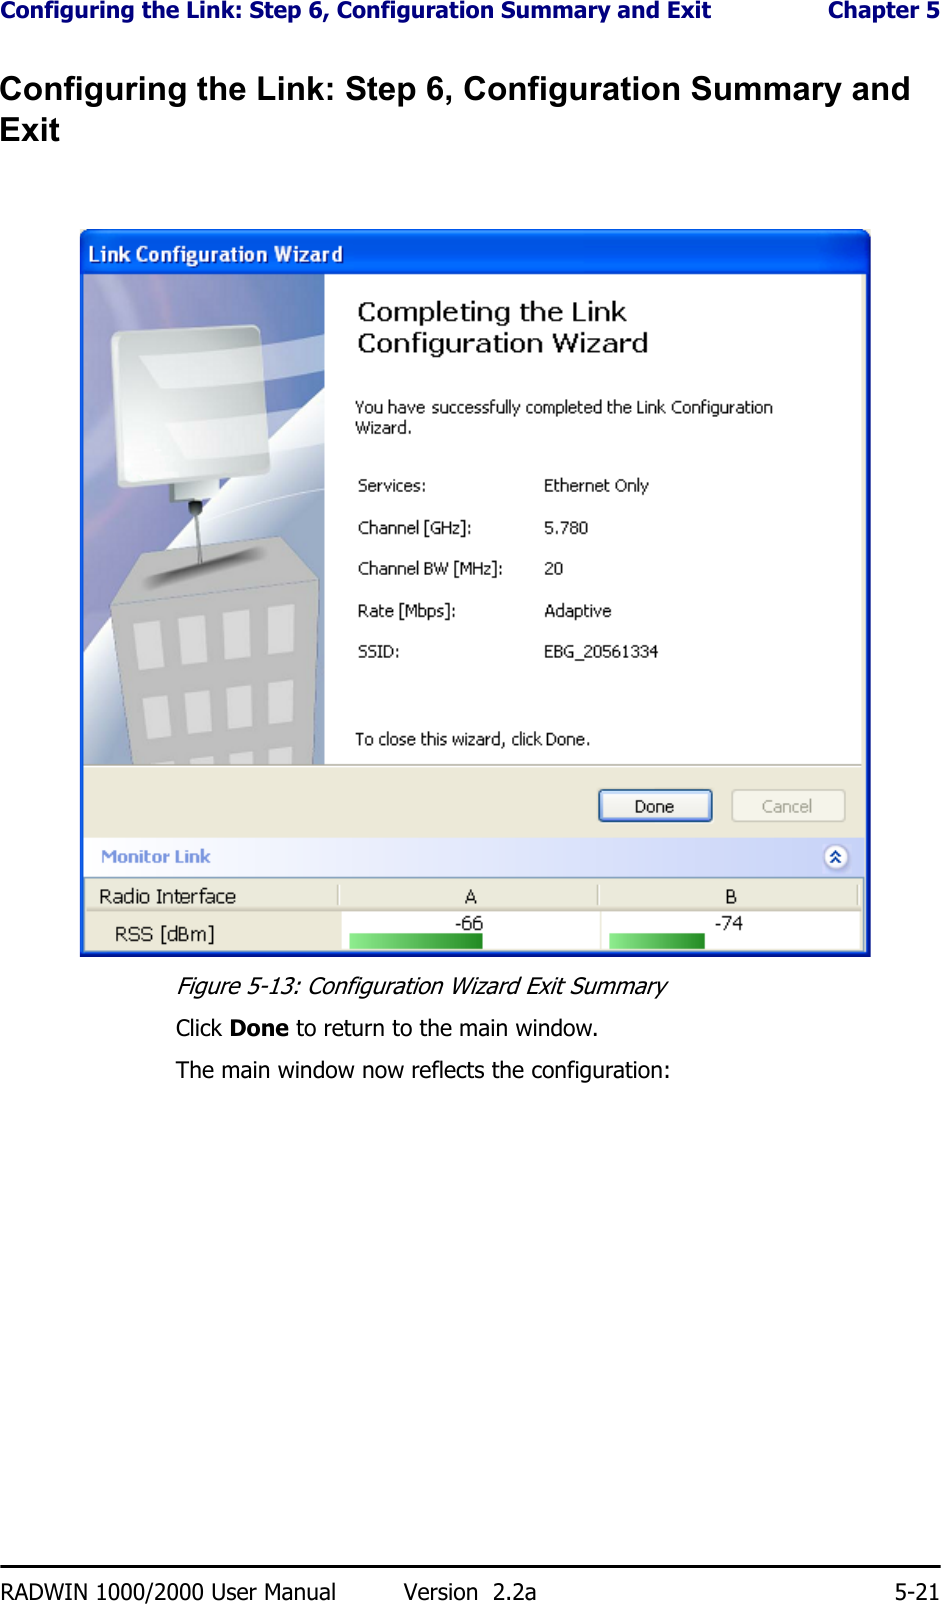 Configuring the Link: Step 6, Configuration Summary and Exit  Chapter 5RADWIN 1000/2000 User Manual Version  2.2a 5-21Configuring the Link: Step 6, Configuration Summary and ExitFigure 5-13: Configuration Wizard Exit Summary Click Done to return to the main window.The main window now reflects the configuration: